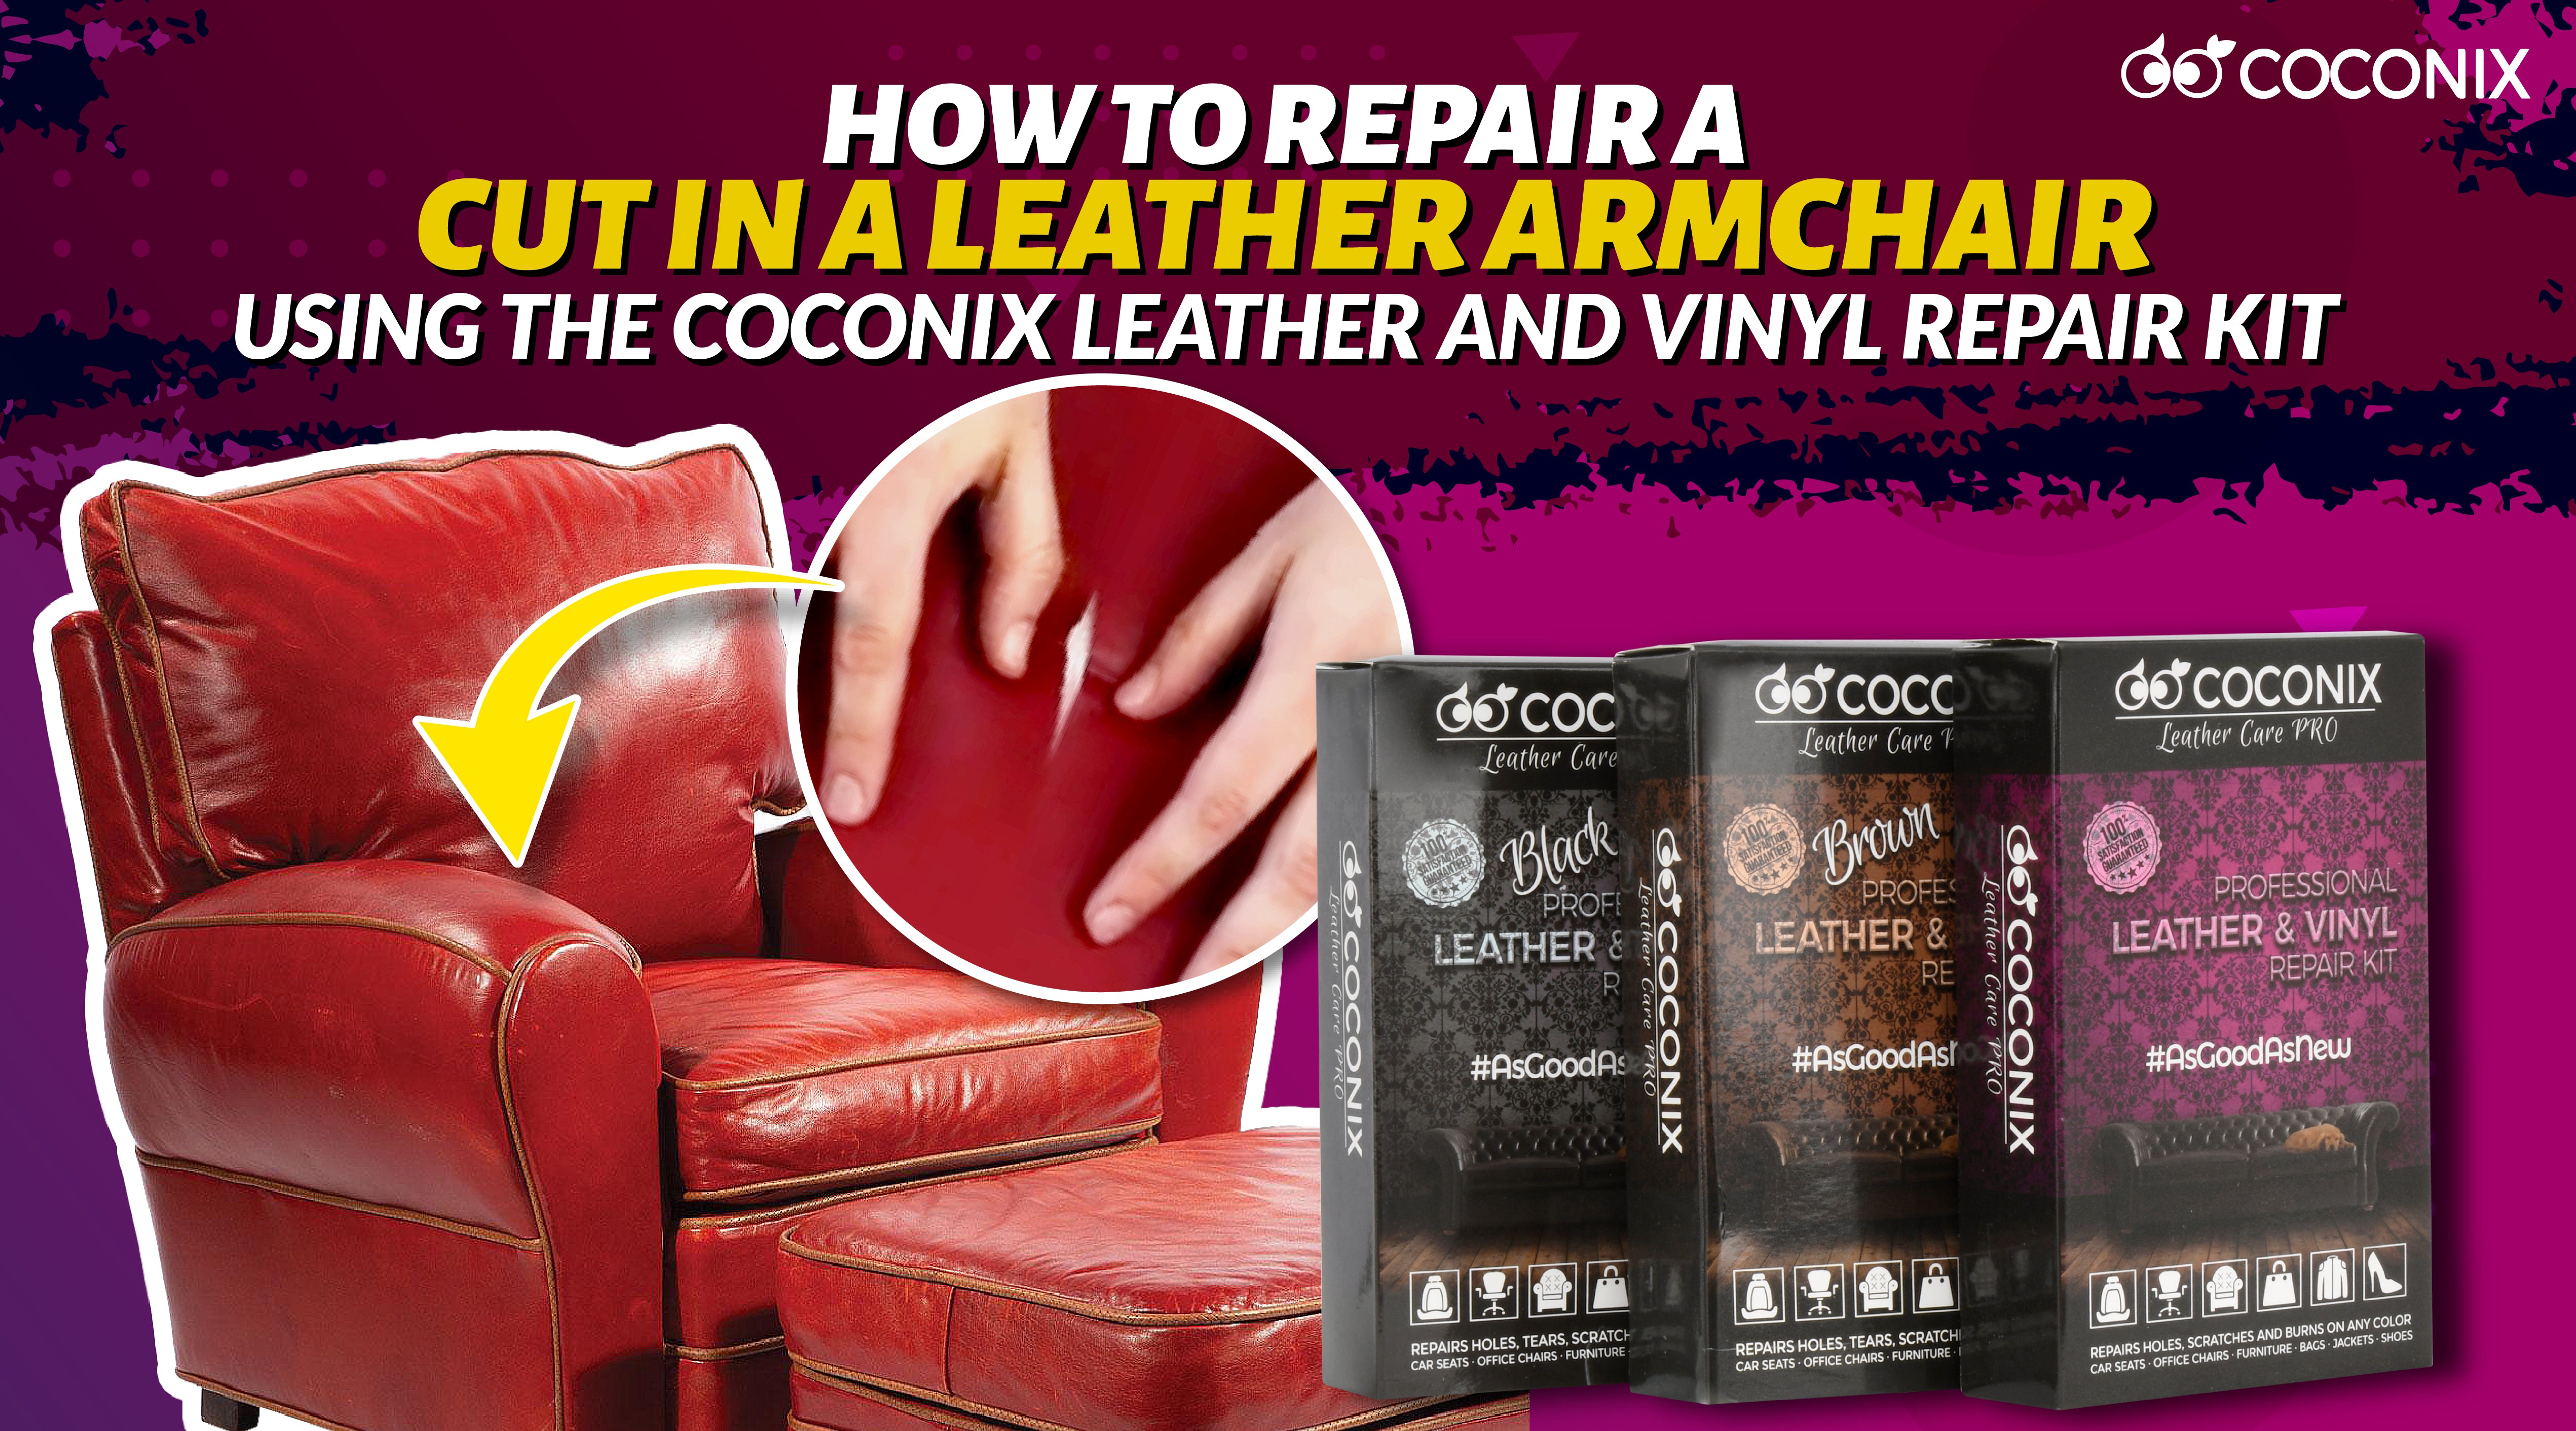 How to repair a peeling vinyl dining chair seat using the Coconix Leat